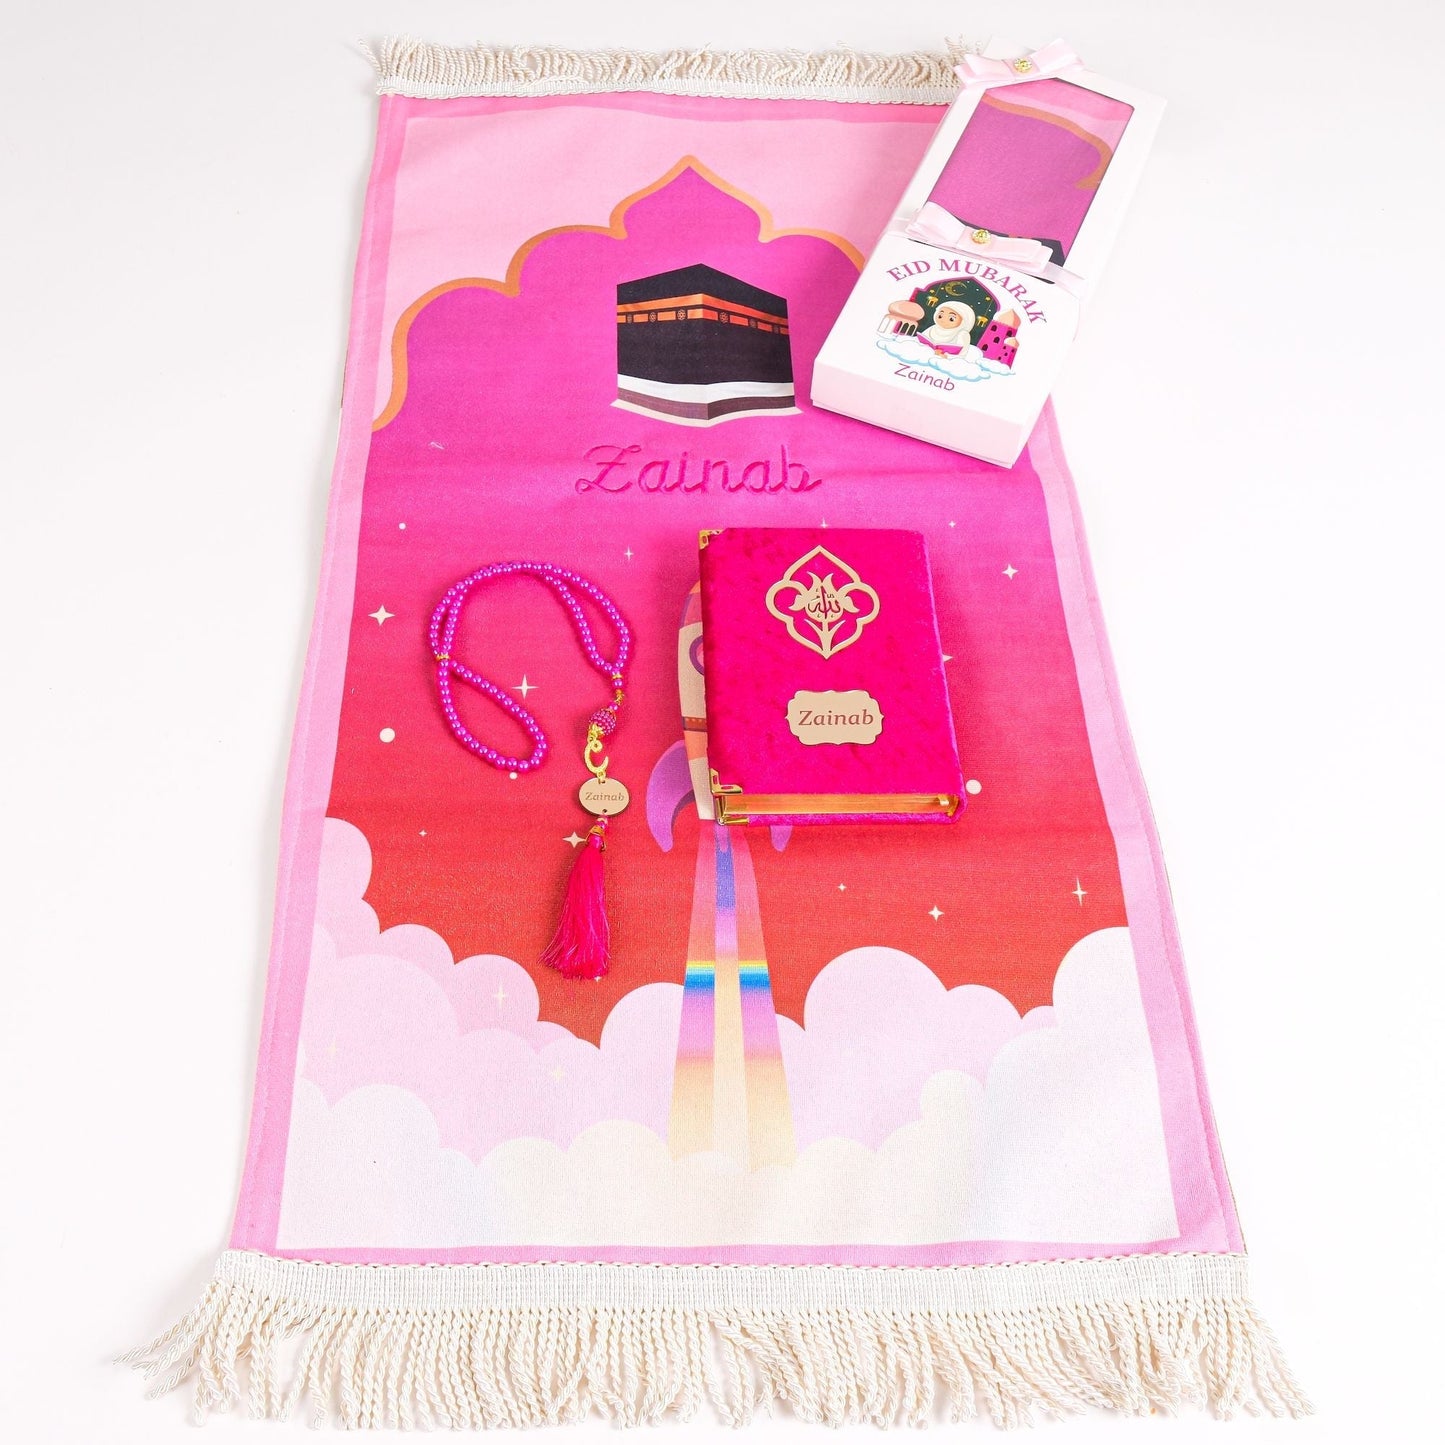 Personalized Soft Prayer Mat for Girls Quran Tasbeeh Islamic Gift Set - Islamic Elite Favors is a handmade gift shop offering a wide variety of unique and personalized gifts for all occasions. Whether you're looking for the perfect Ramadan, Eid, Hajj, wedding gift or something special for a birthday, baby shower or anniversary, we have something for everyone. High quality, made with love.